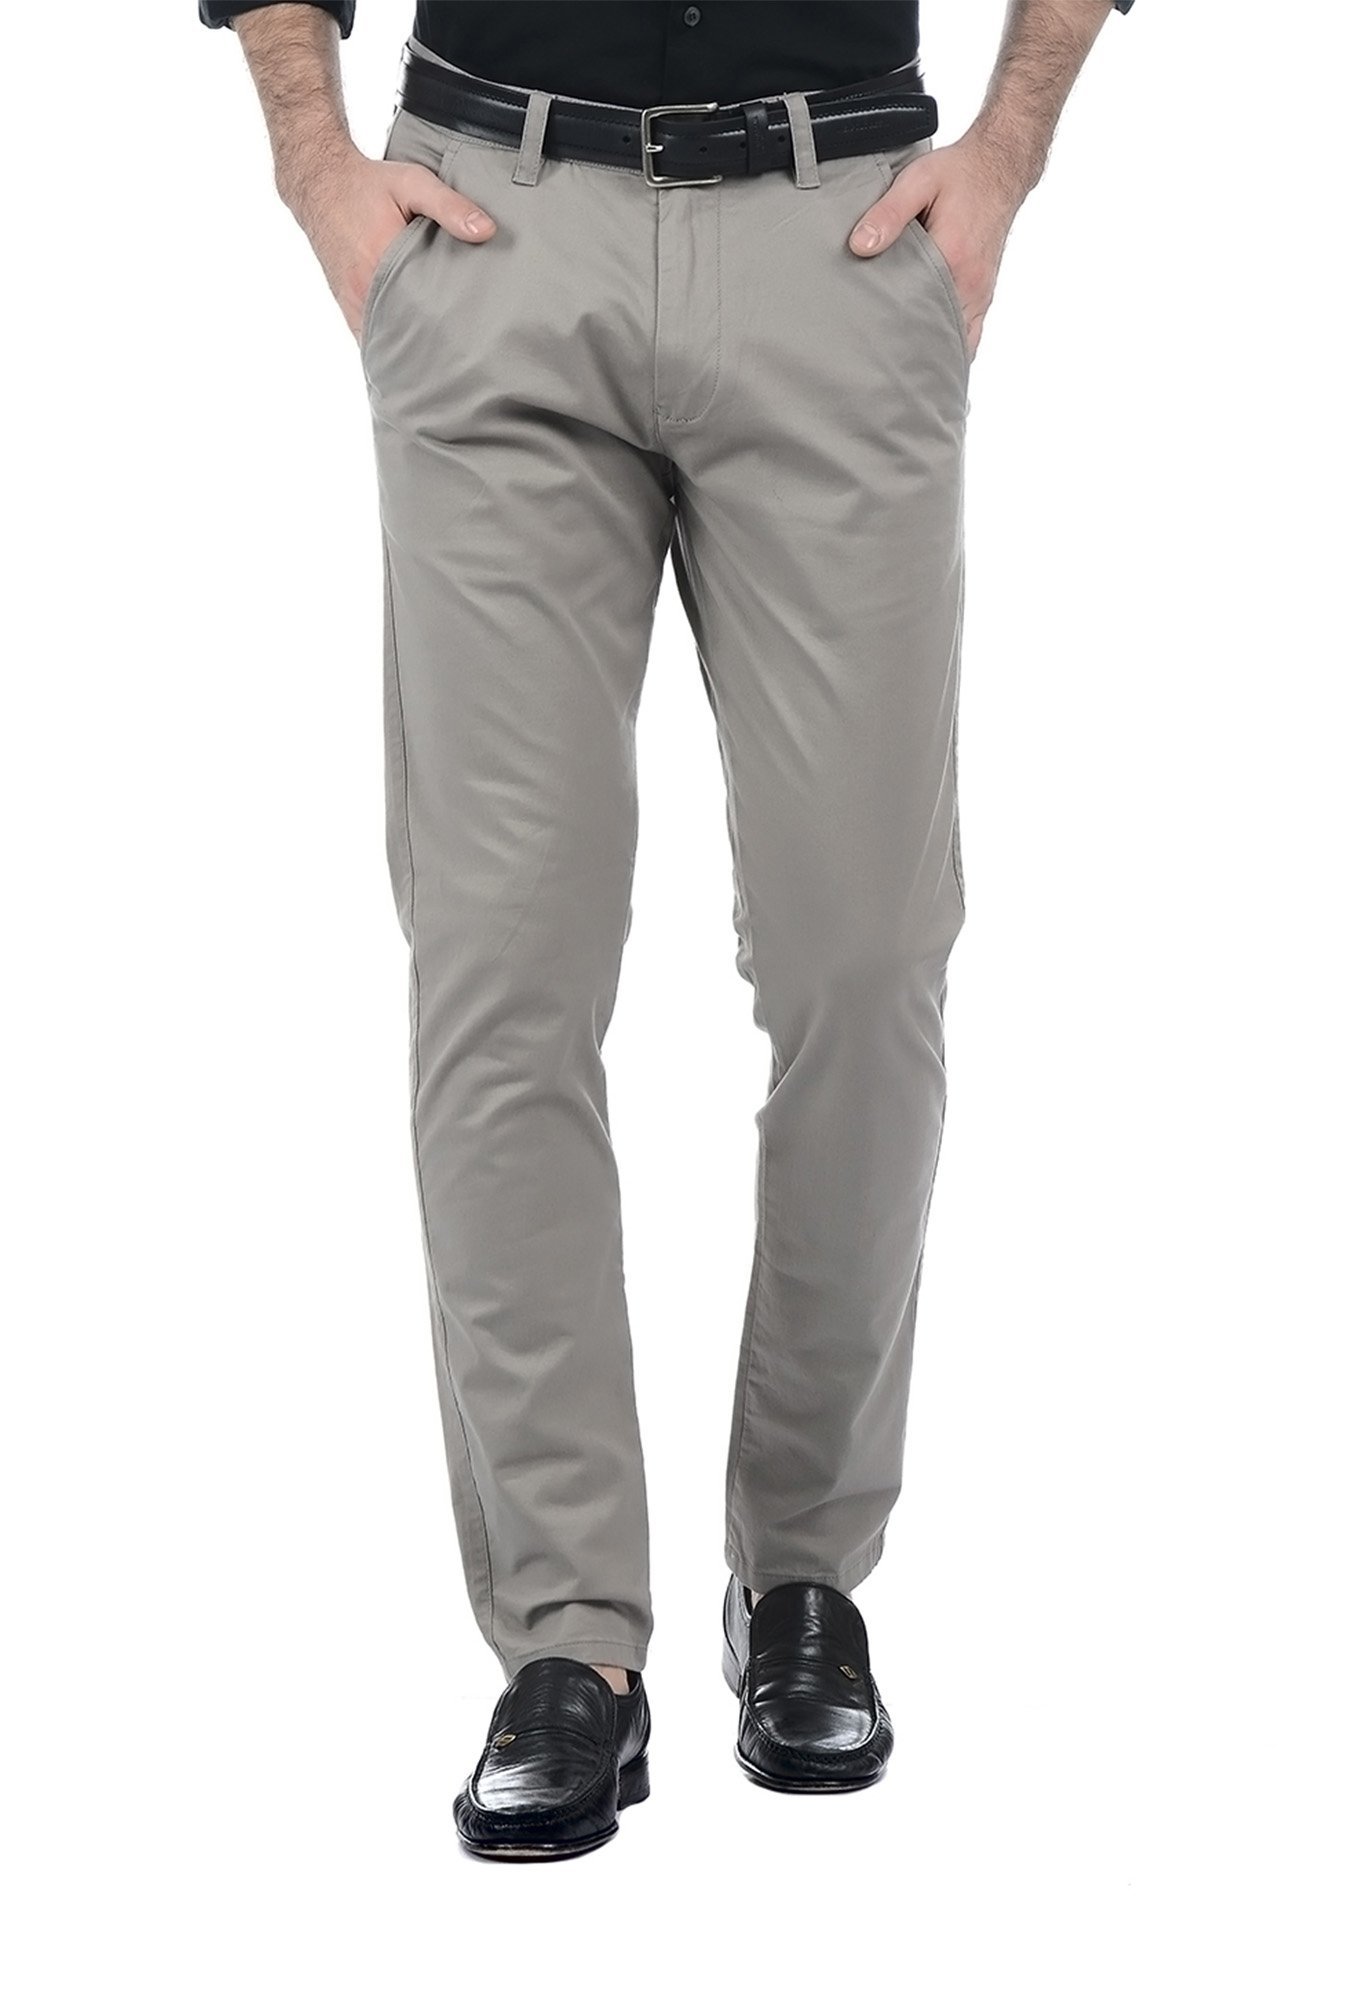 10 Stylish Grey Trousers Collection for Men and Women